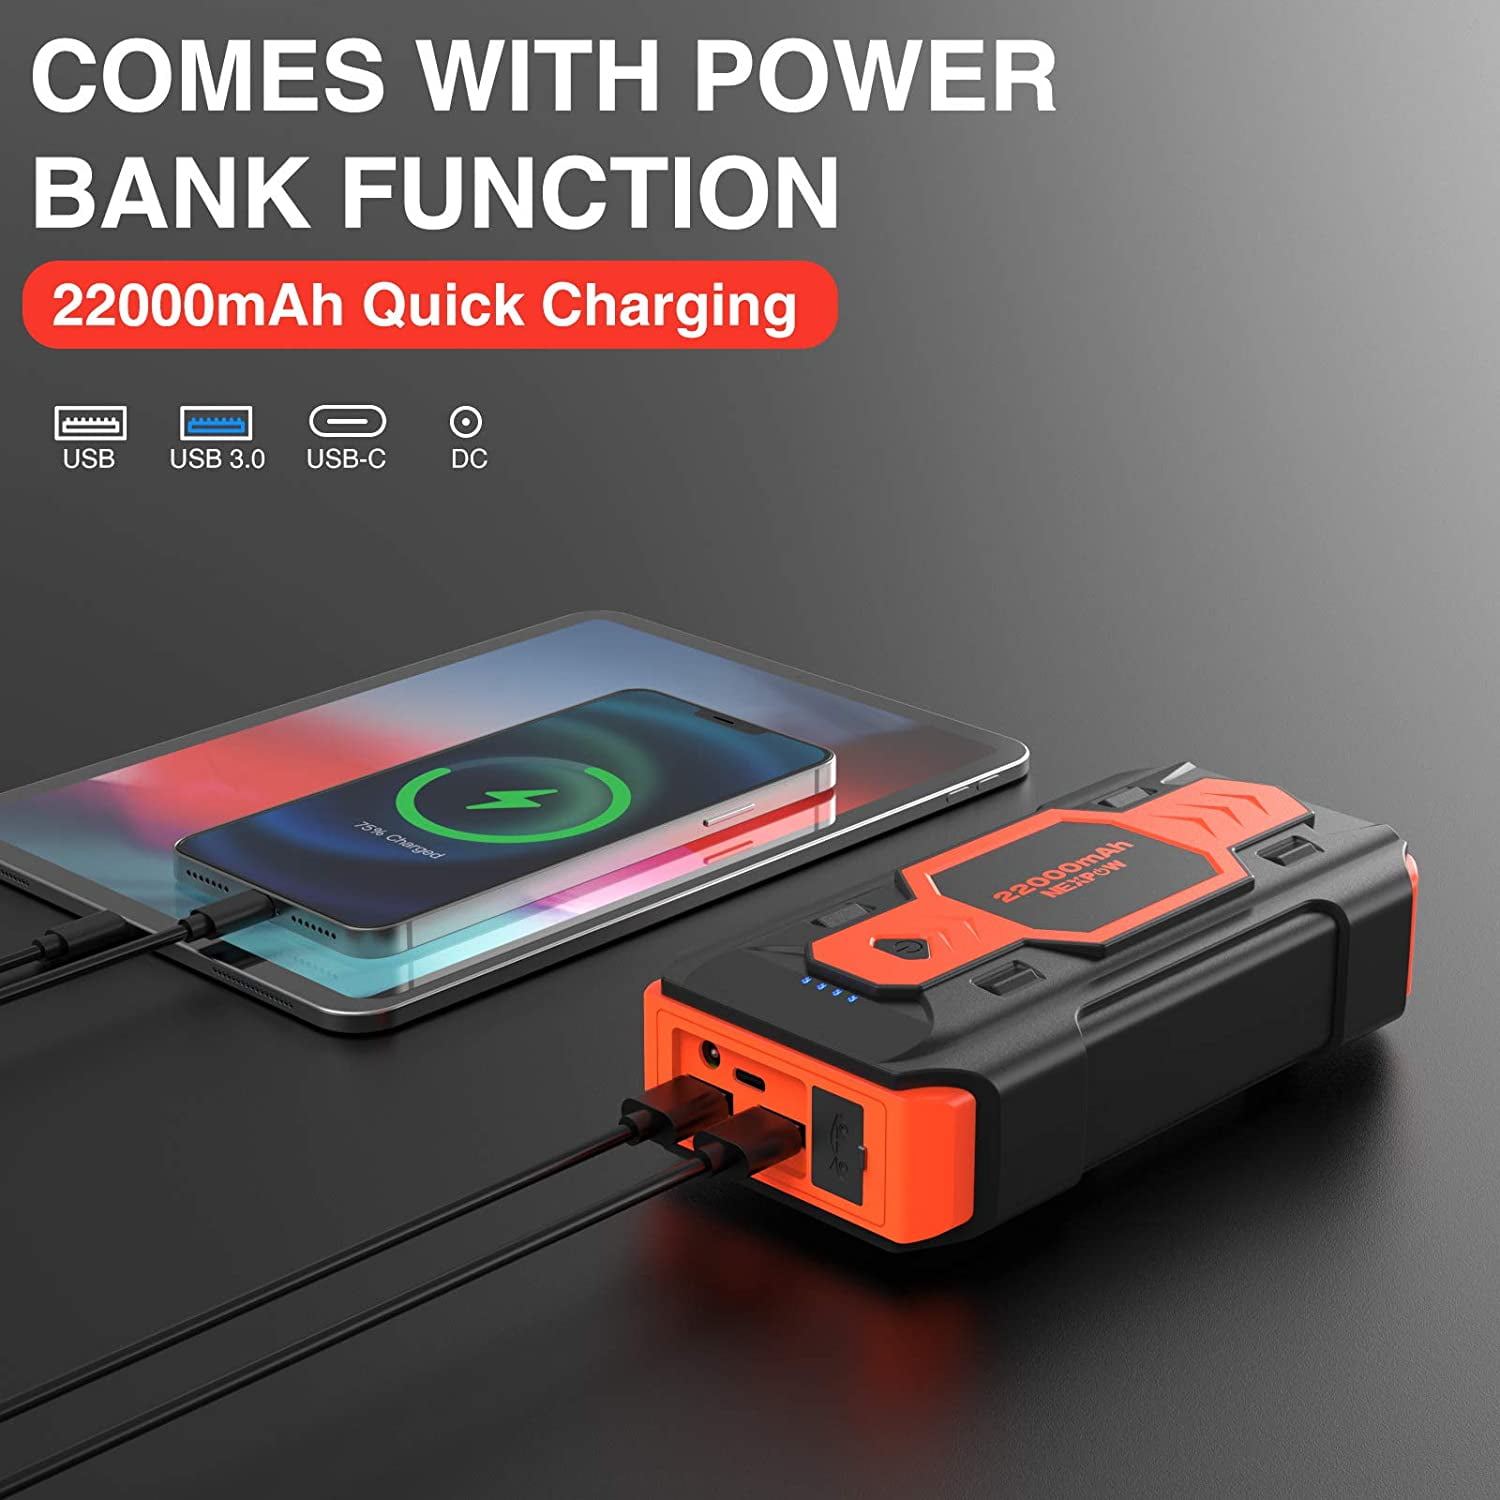 JUMTOP QDSP 3000A Peak 22000mAh Portable Car Jump Starter-UL Certified 10L Gas/8L Diesel Engine Auto Battery Booster Power Bank Phone Charger with Dual USB Smart Charging Port and LED Flashlight 